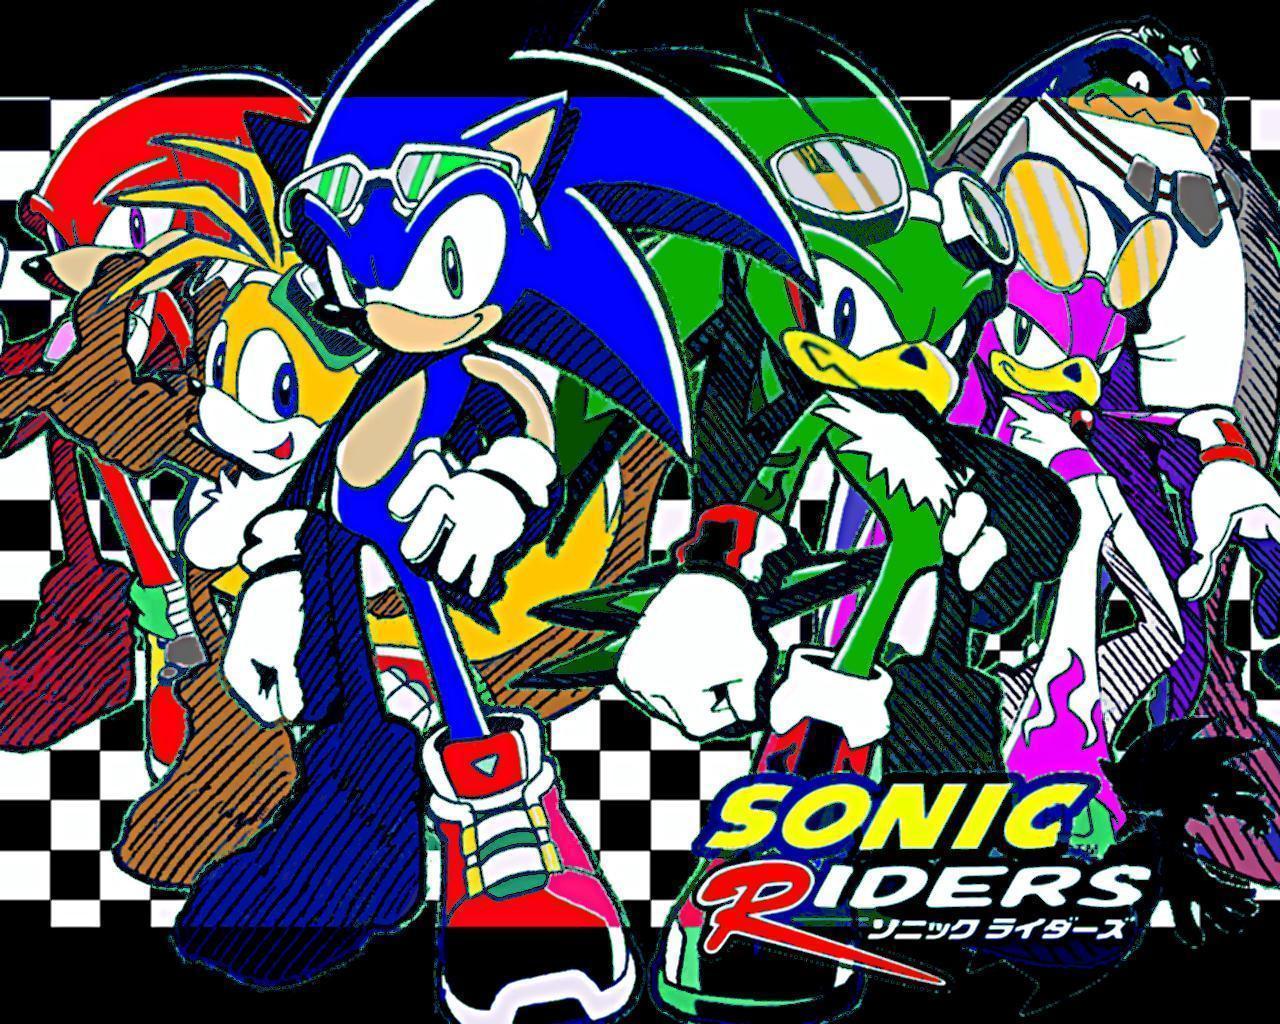 Sonic Riders Wallpaper Image & Picture